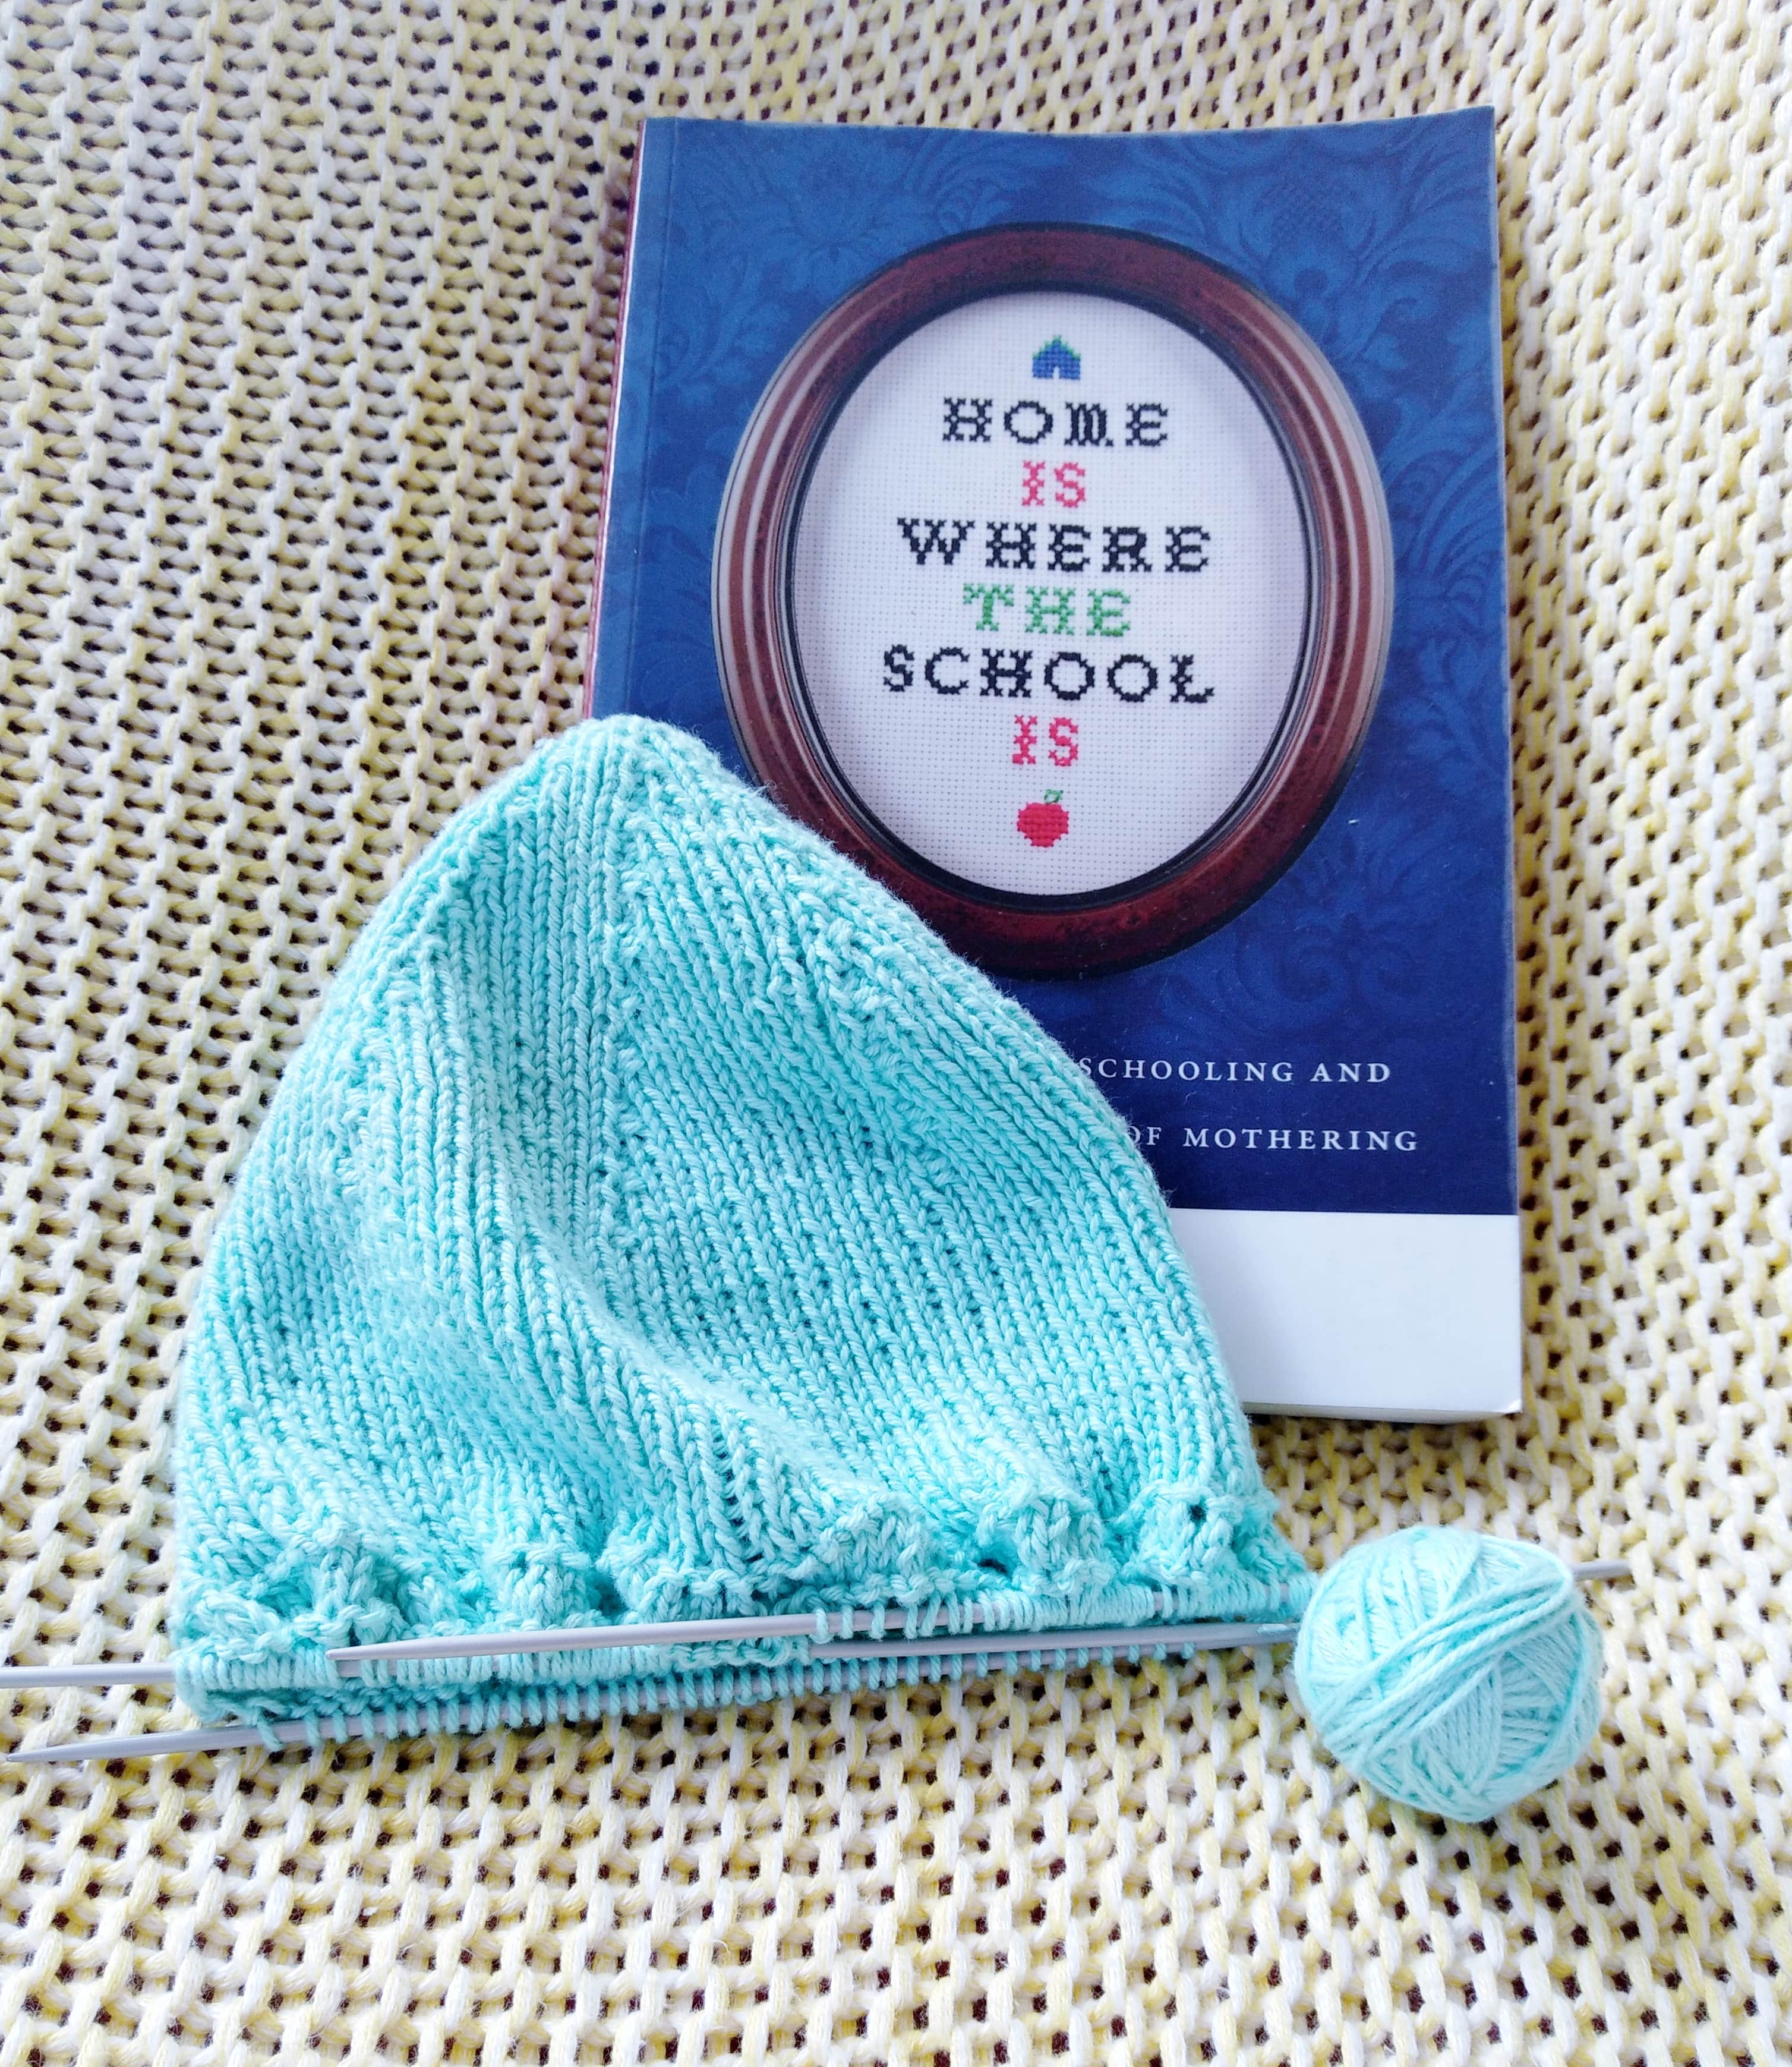 Copy of Home is Where the School Is and unfinished knitted hat